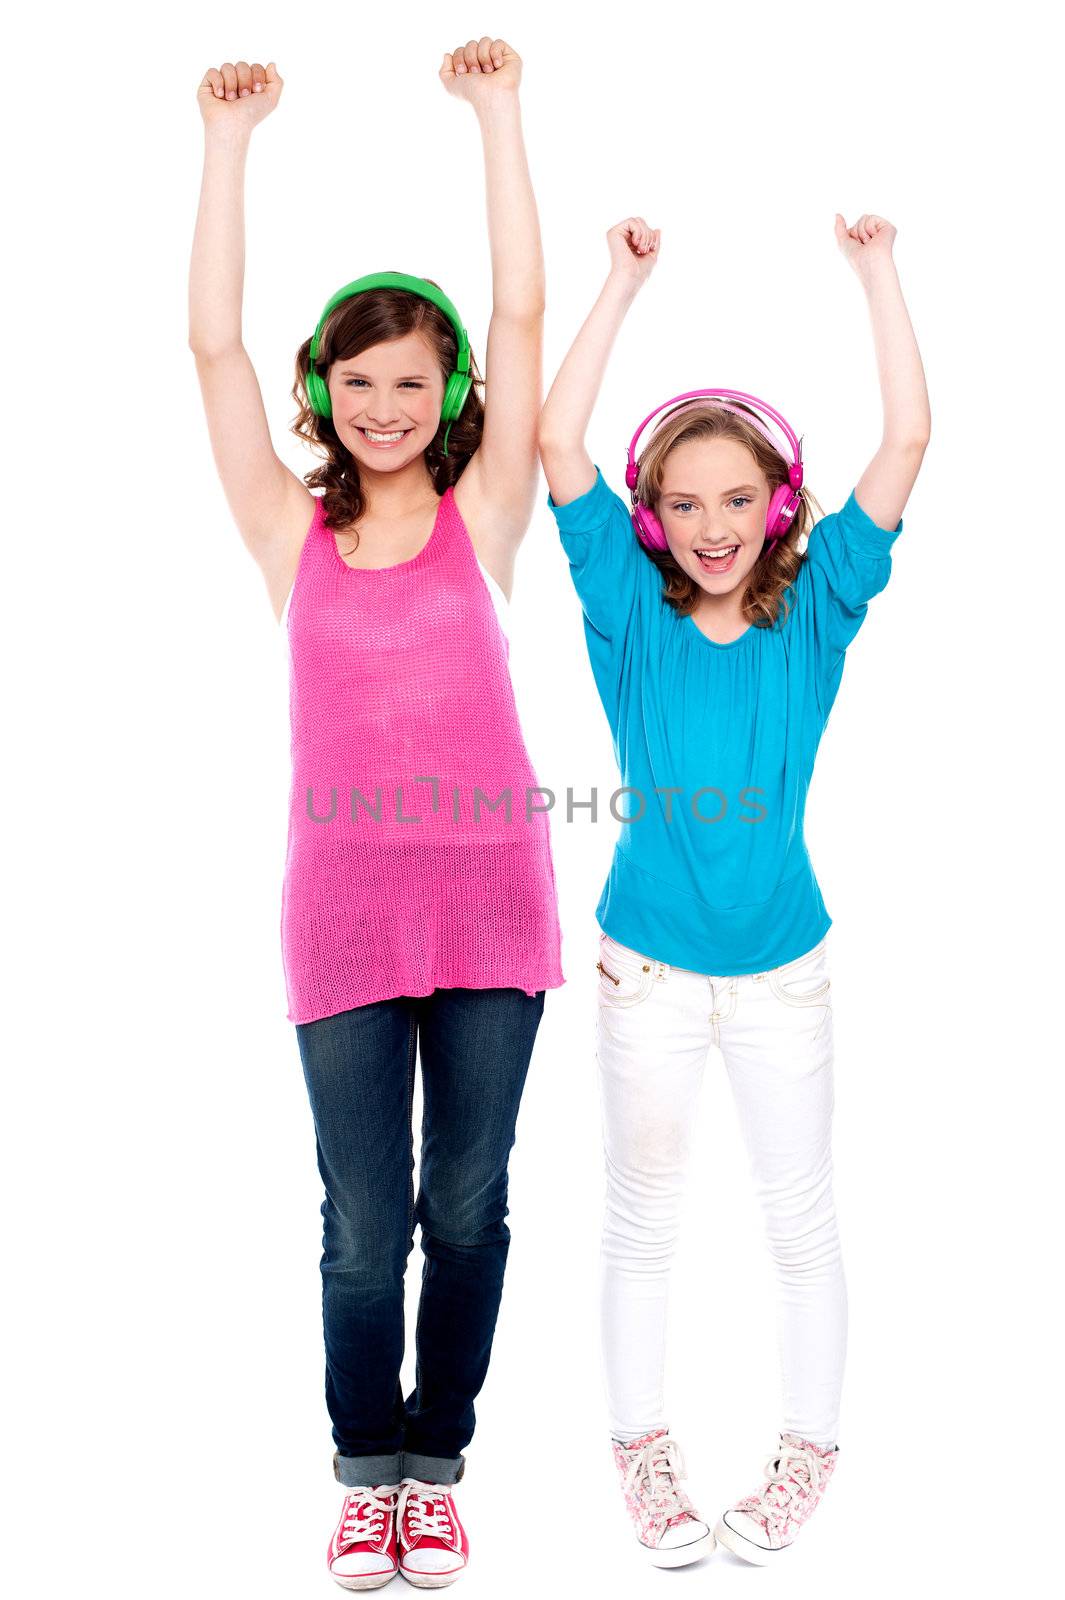 Excited young girls enjoying music together by stockyimages